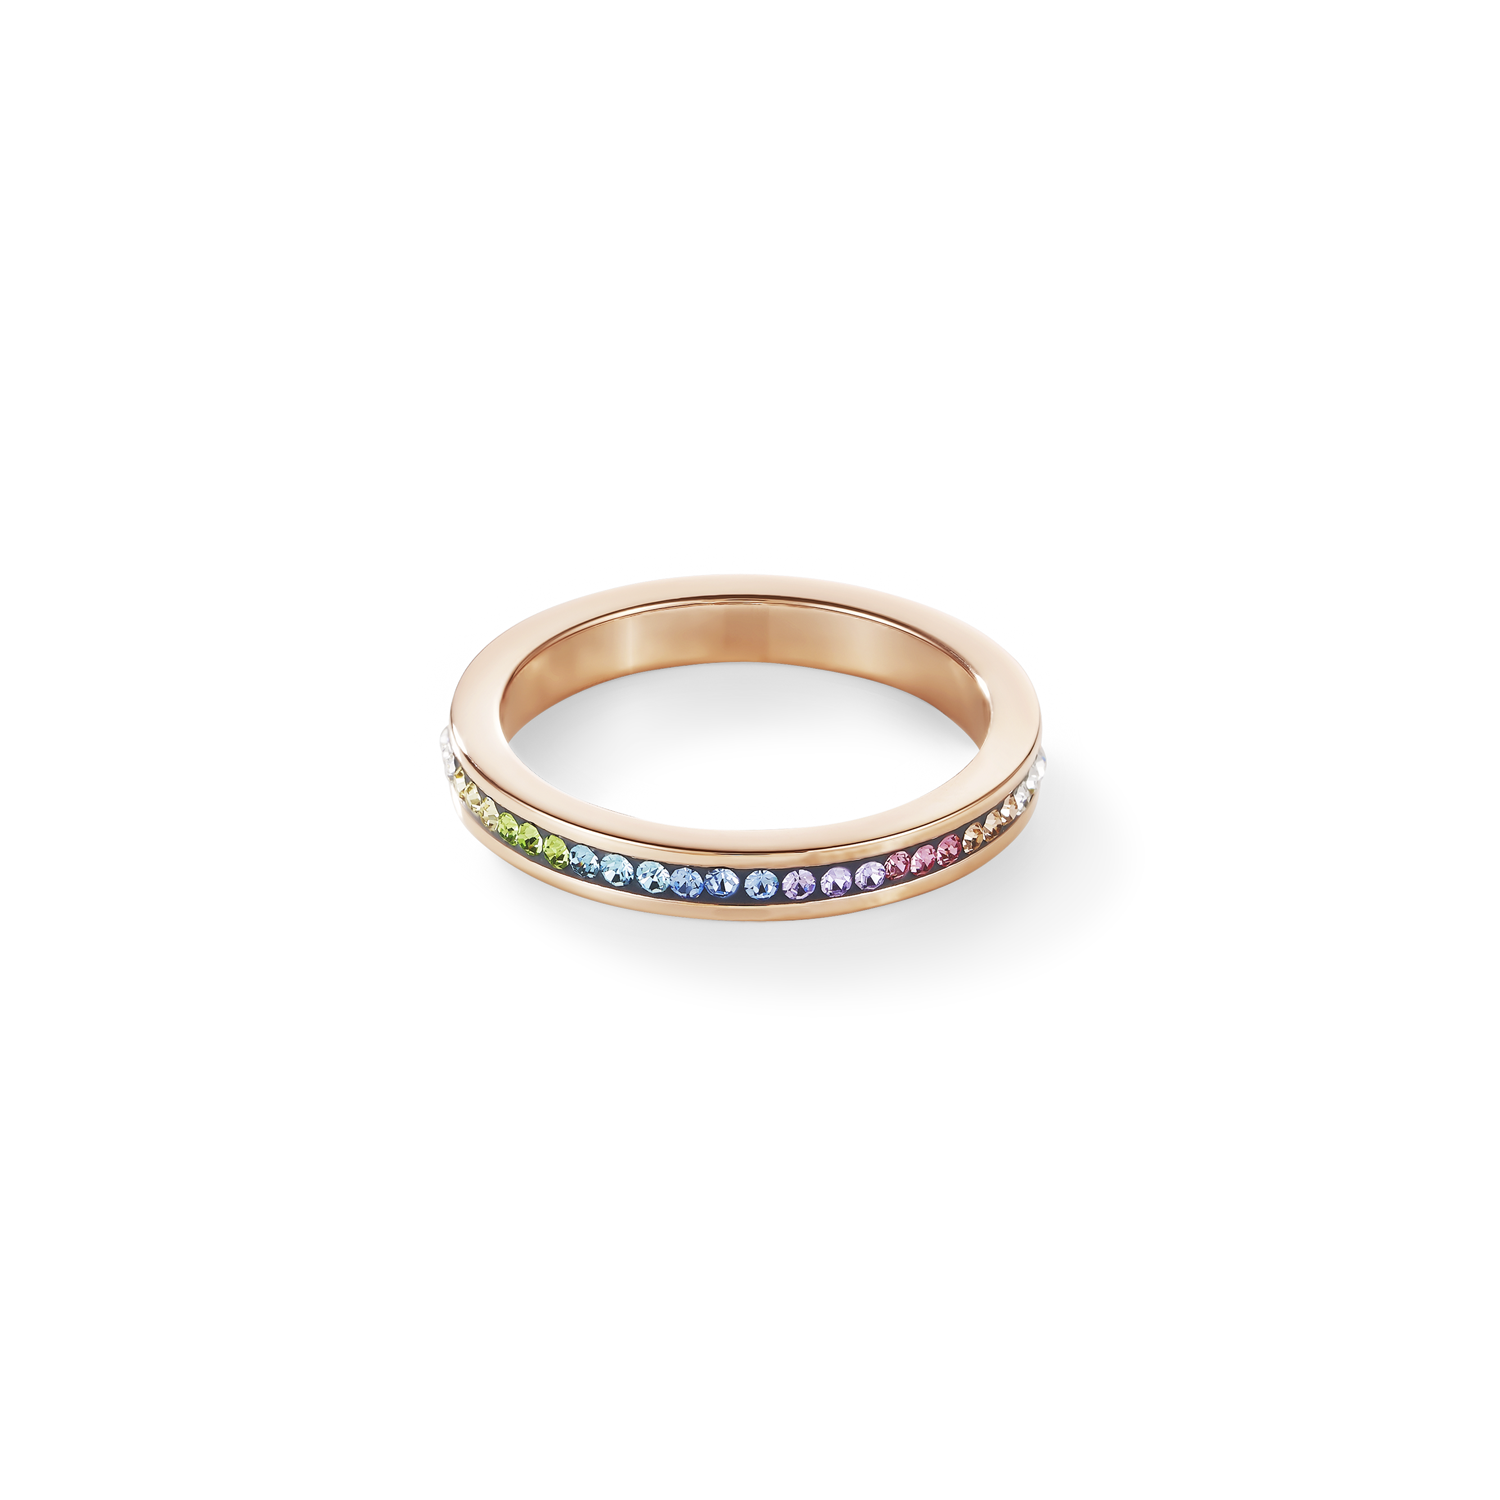 Ring slim stainless steel rose gold & crystals pavé multicolour pastel